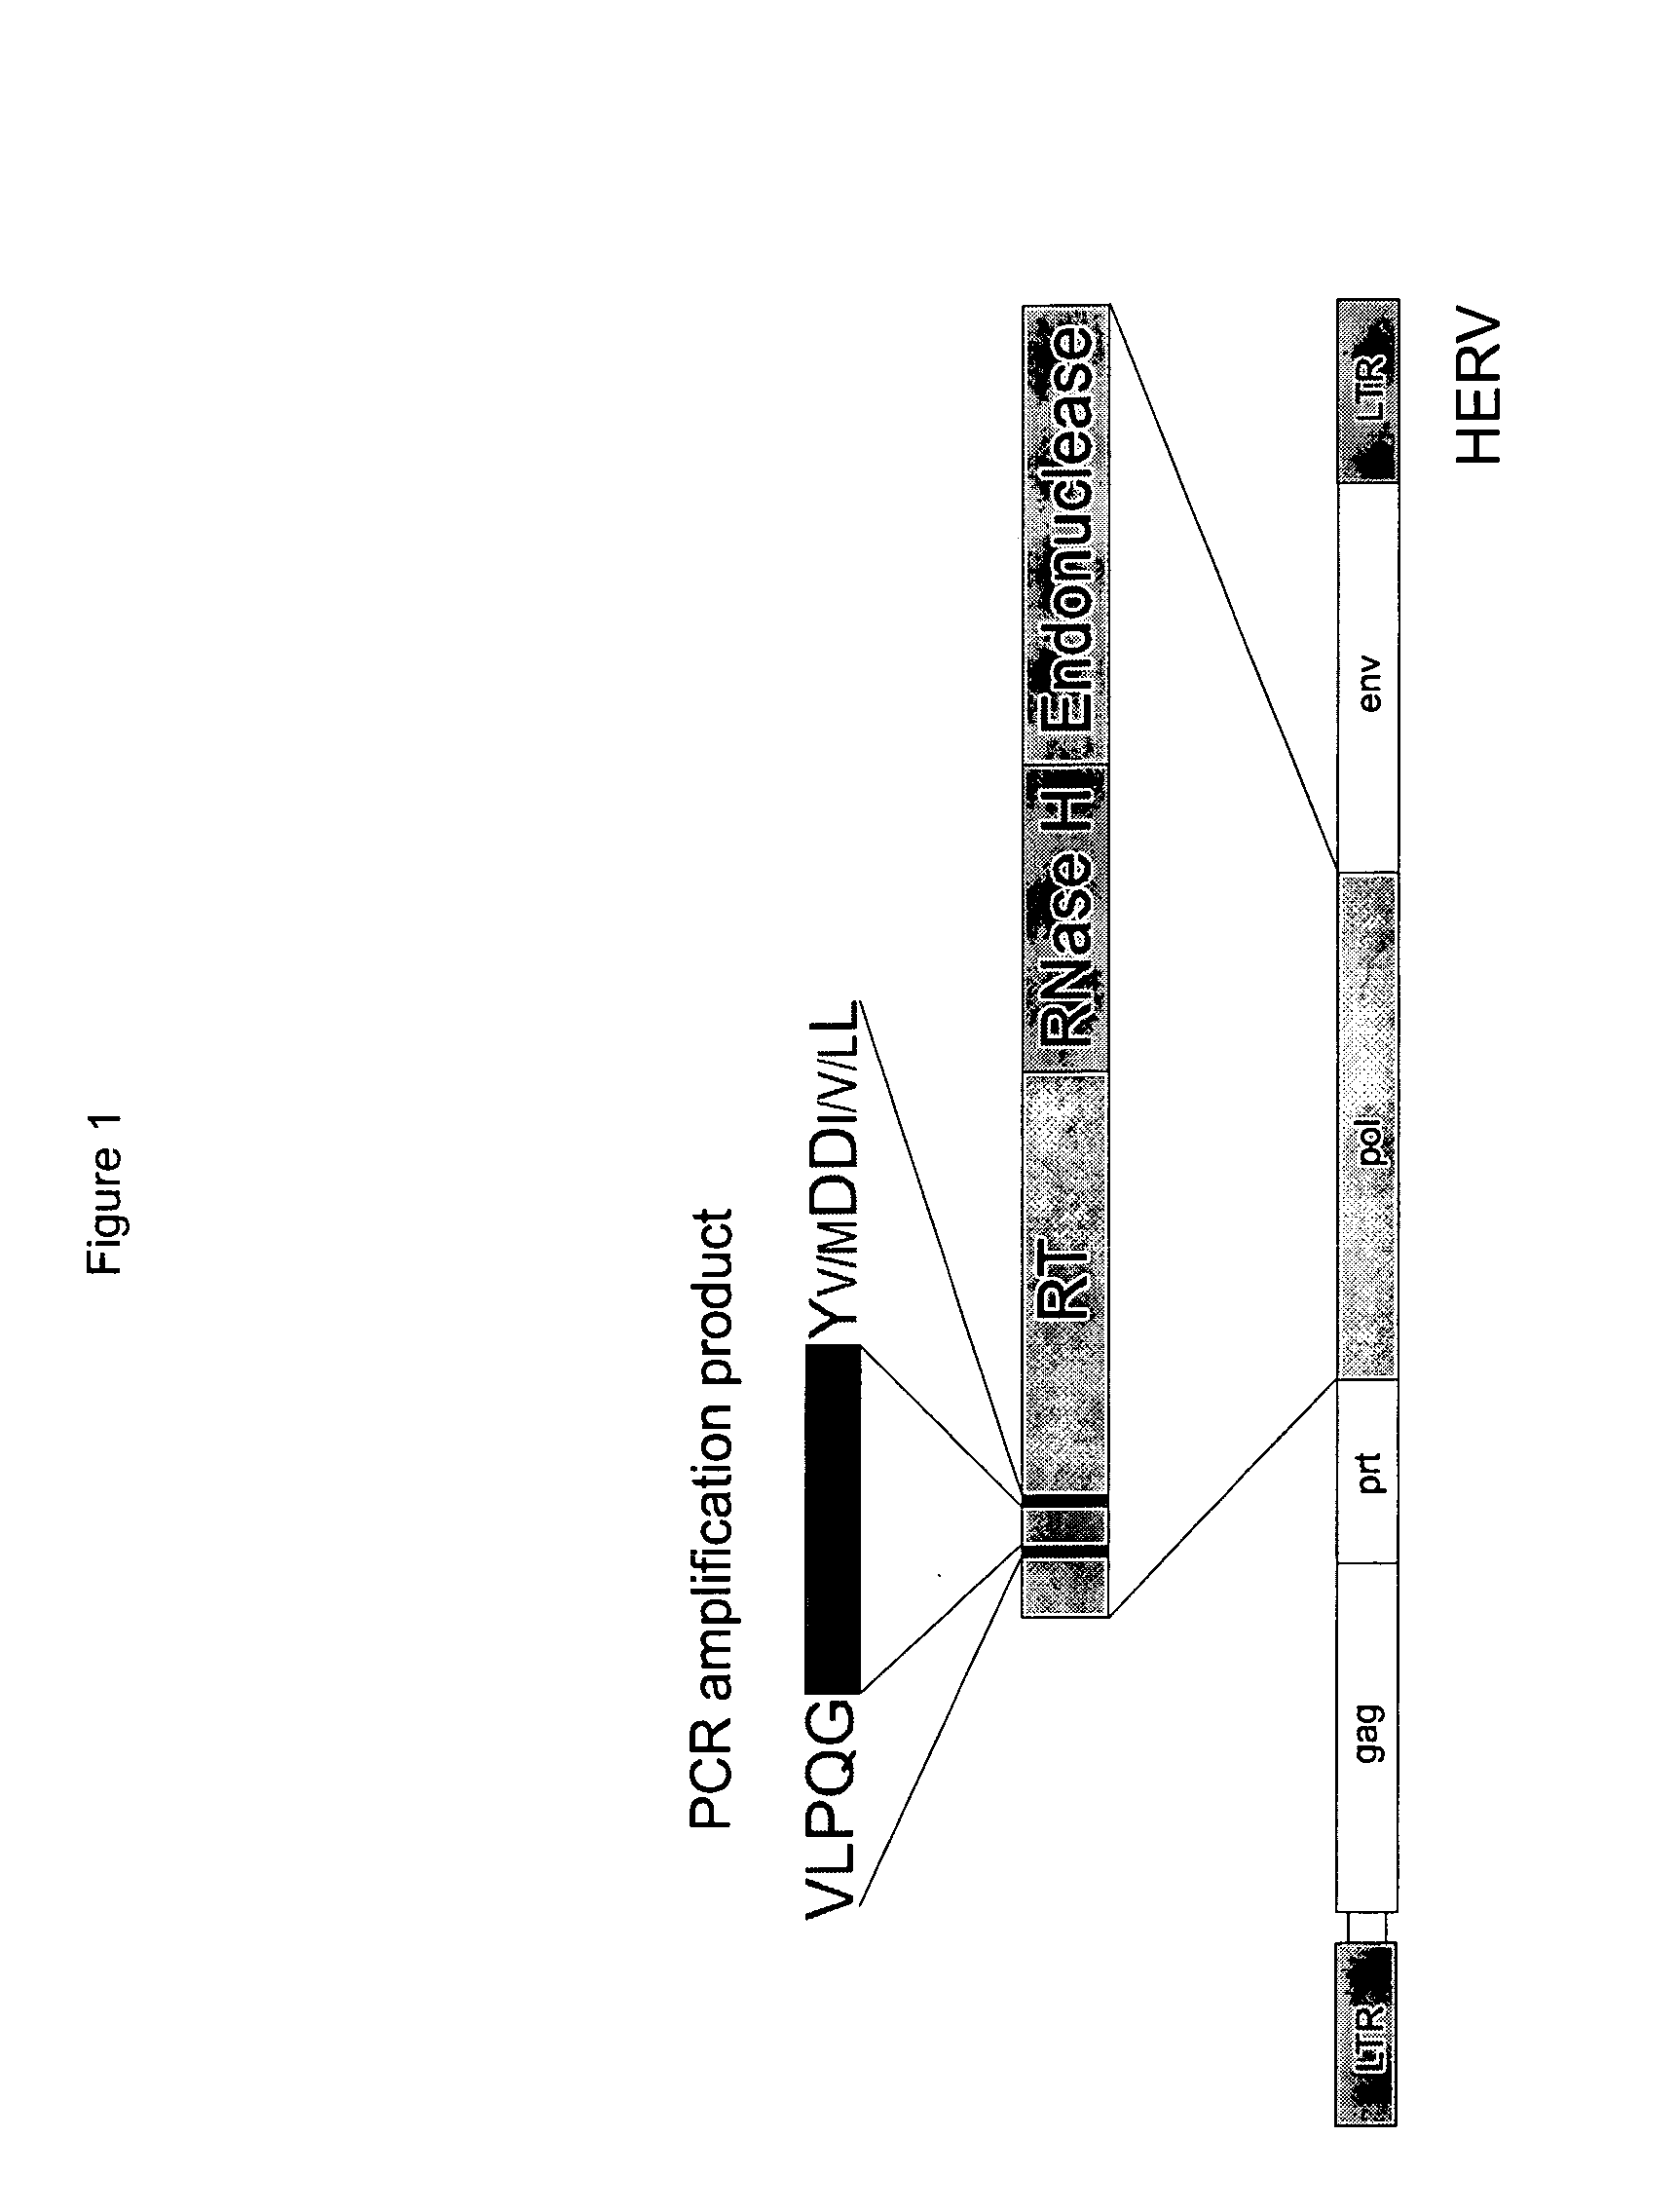 Method for the specific detection and identification of retroviral nucleic acids/retroviruses in a specimen